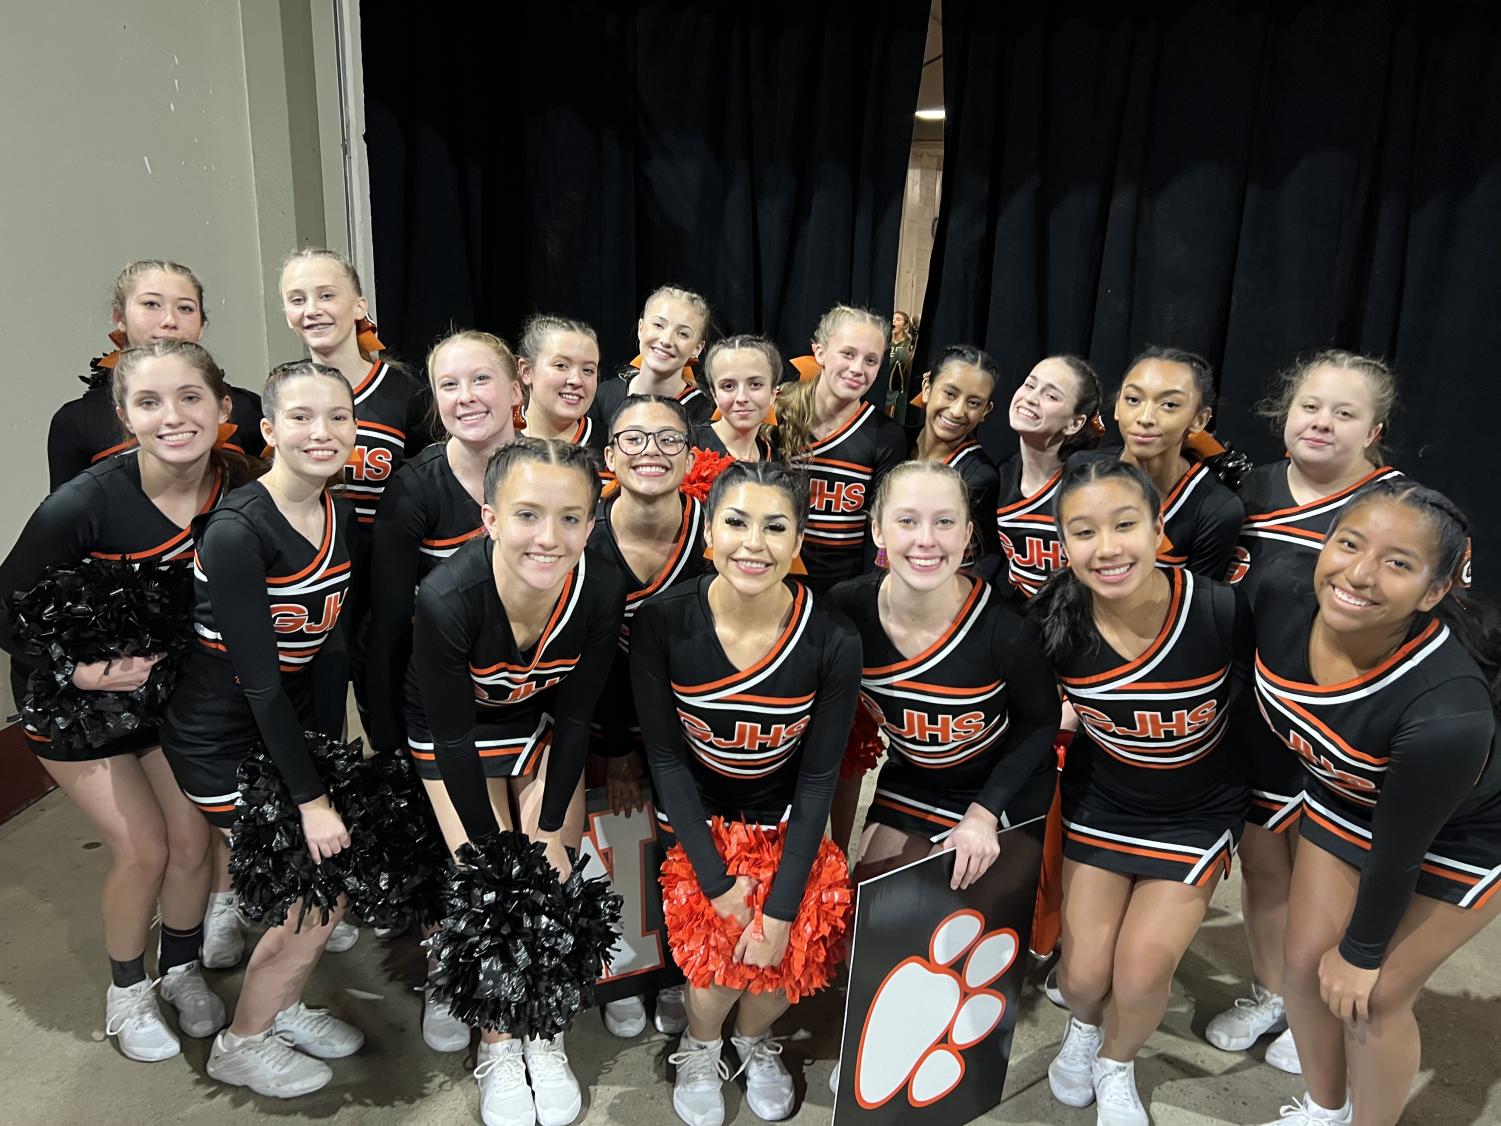 GJHS Cheer team backstage before competing at finals.